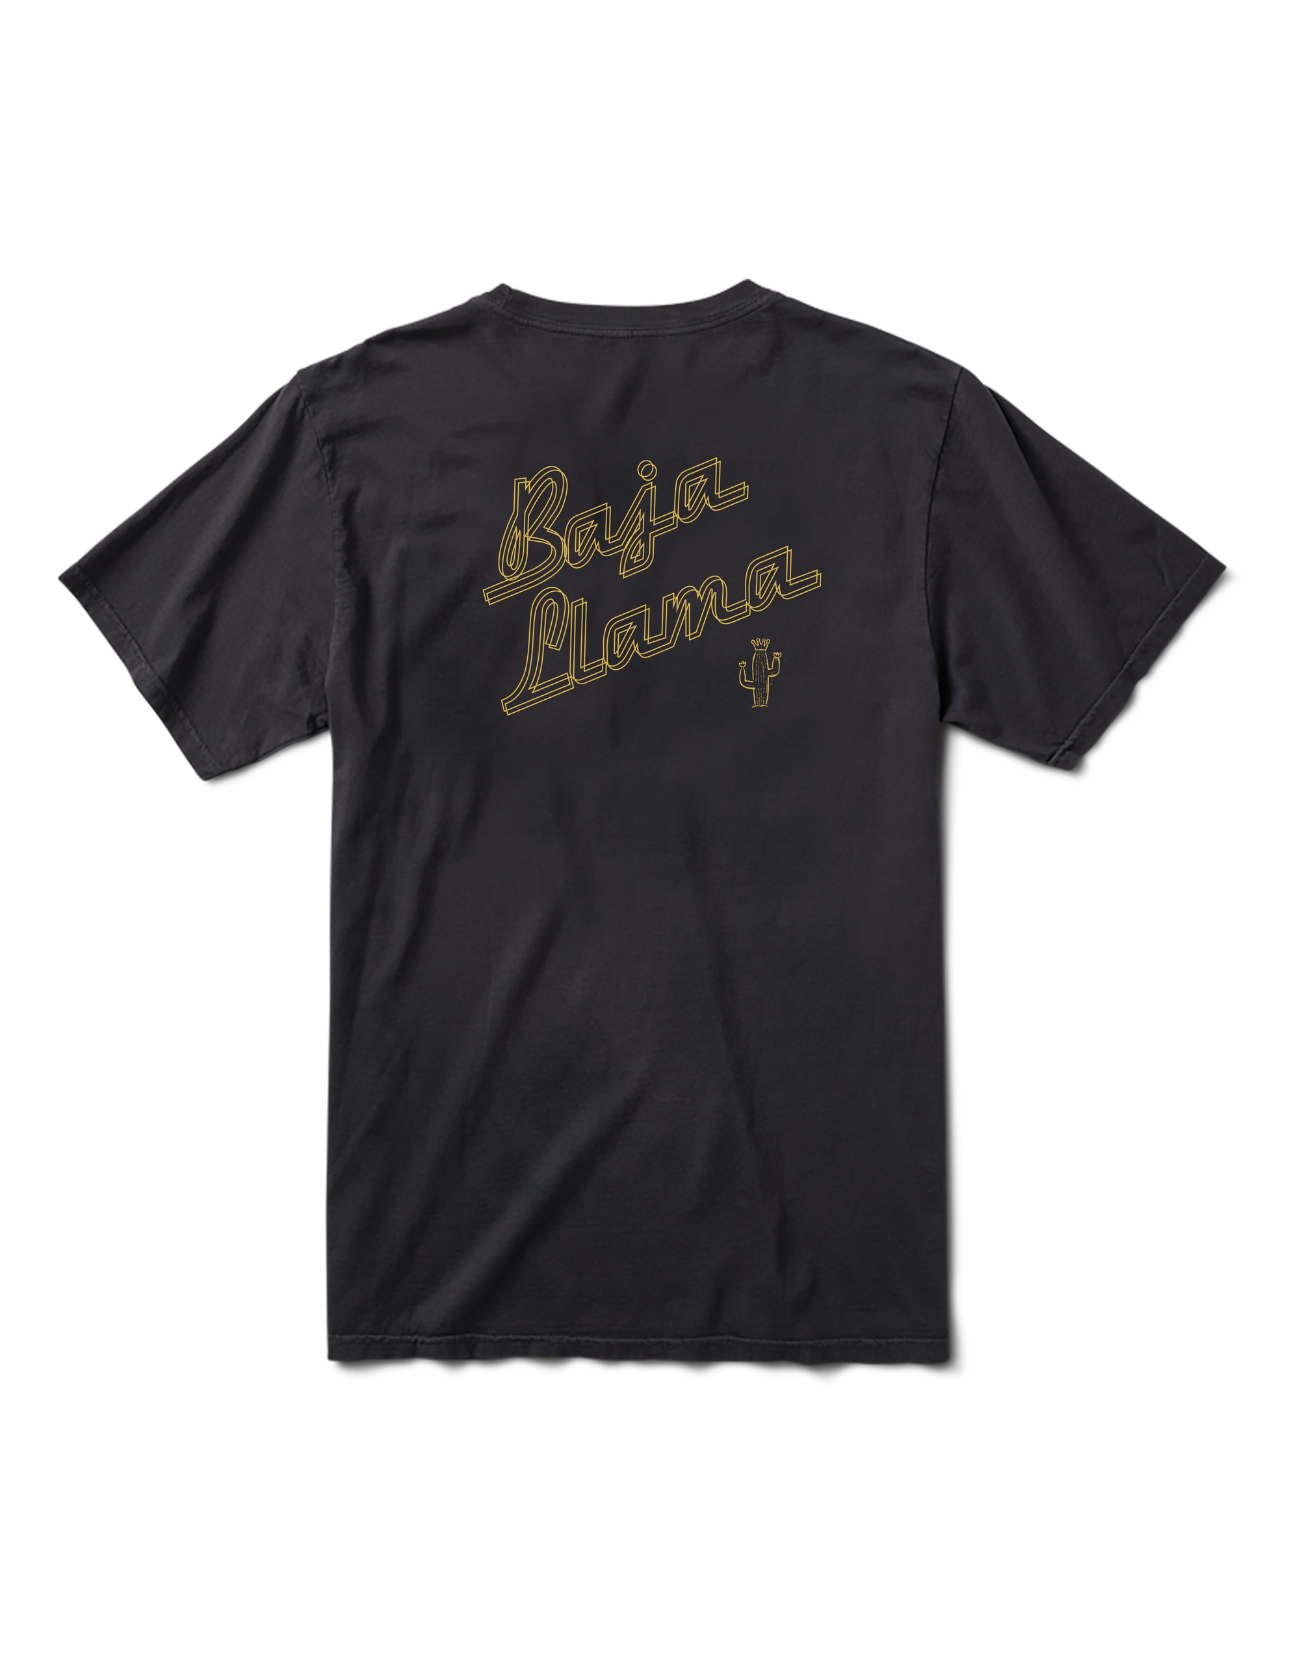 TAKING CARE OF BUSINESS - PRIMO GRAPHIC TEE by Bajallama